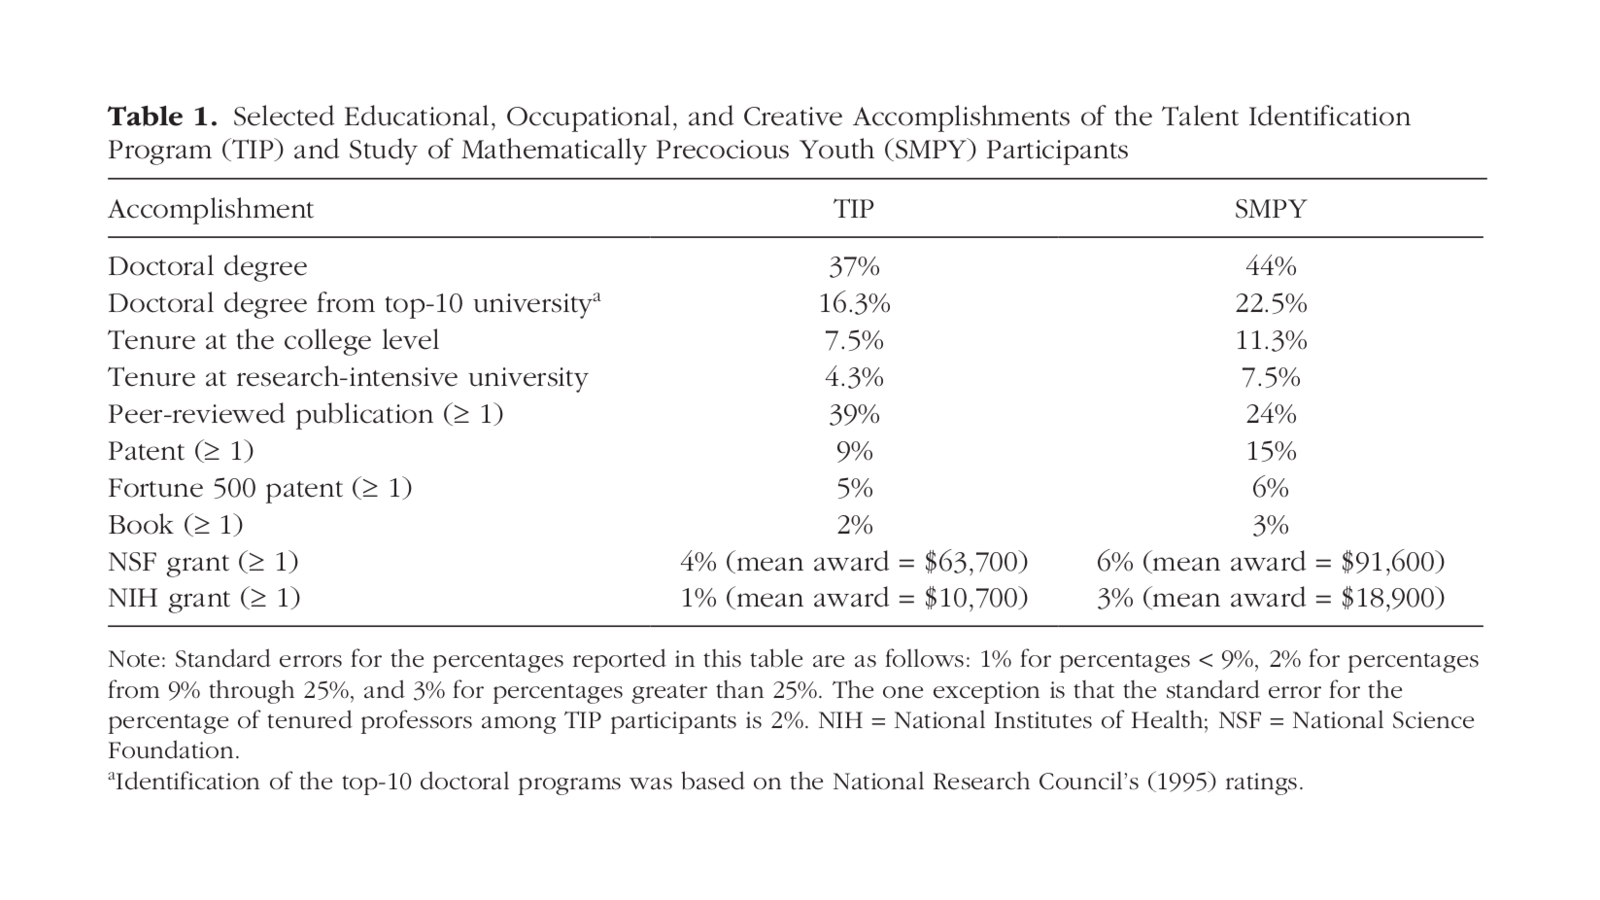 Table 1. Selected Educational, Occupational, and Creative Accomplishments of the Talent Identification Program (TIP) and Study of Mathematically Precocious Youth (SMPY) Participants